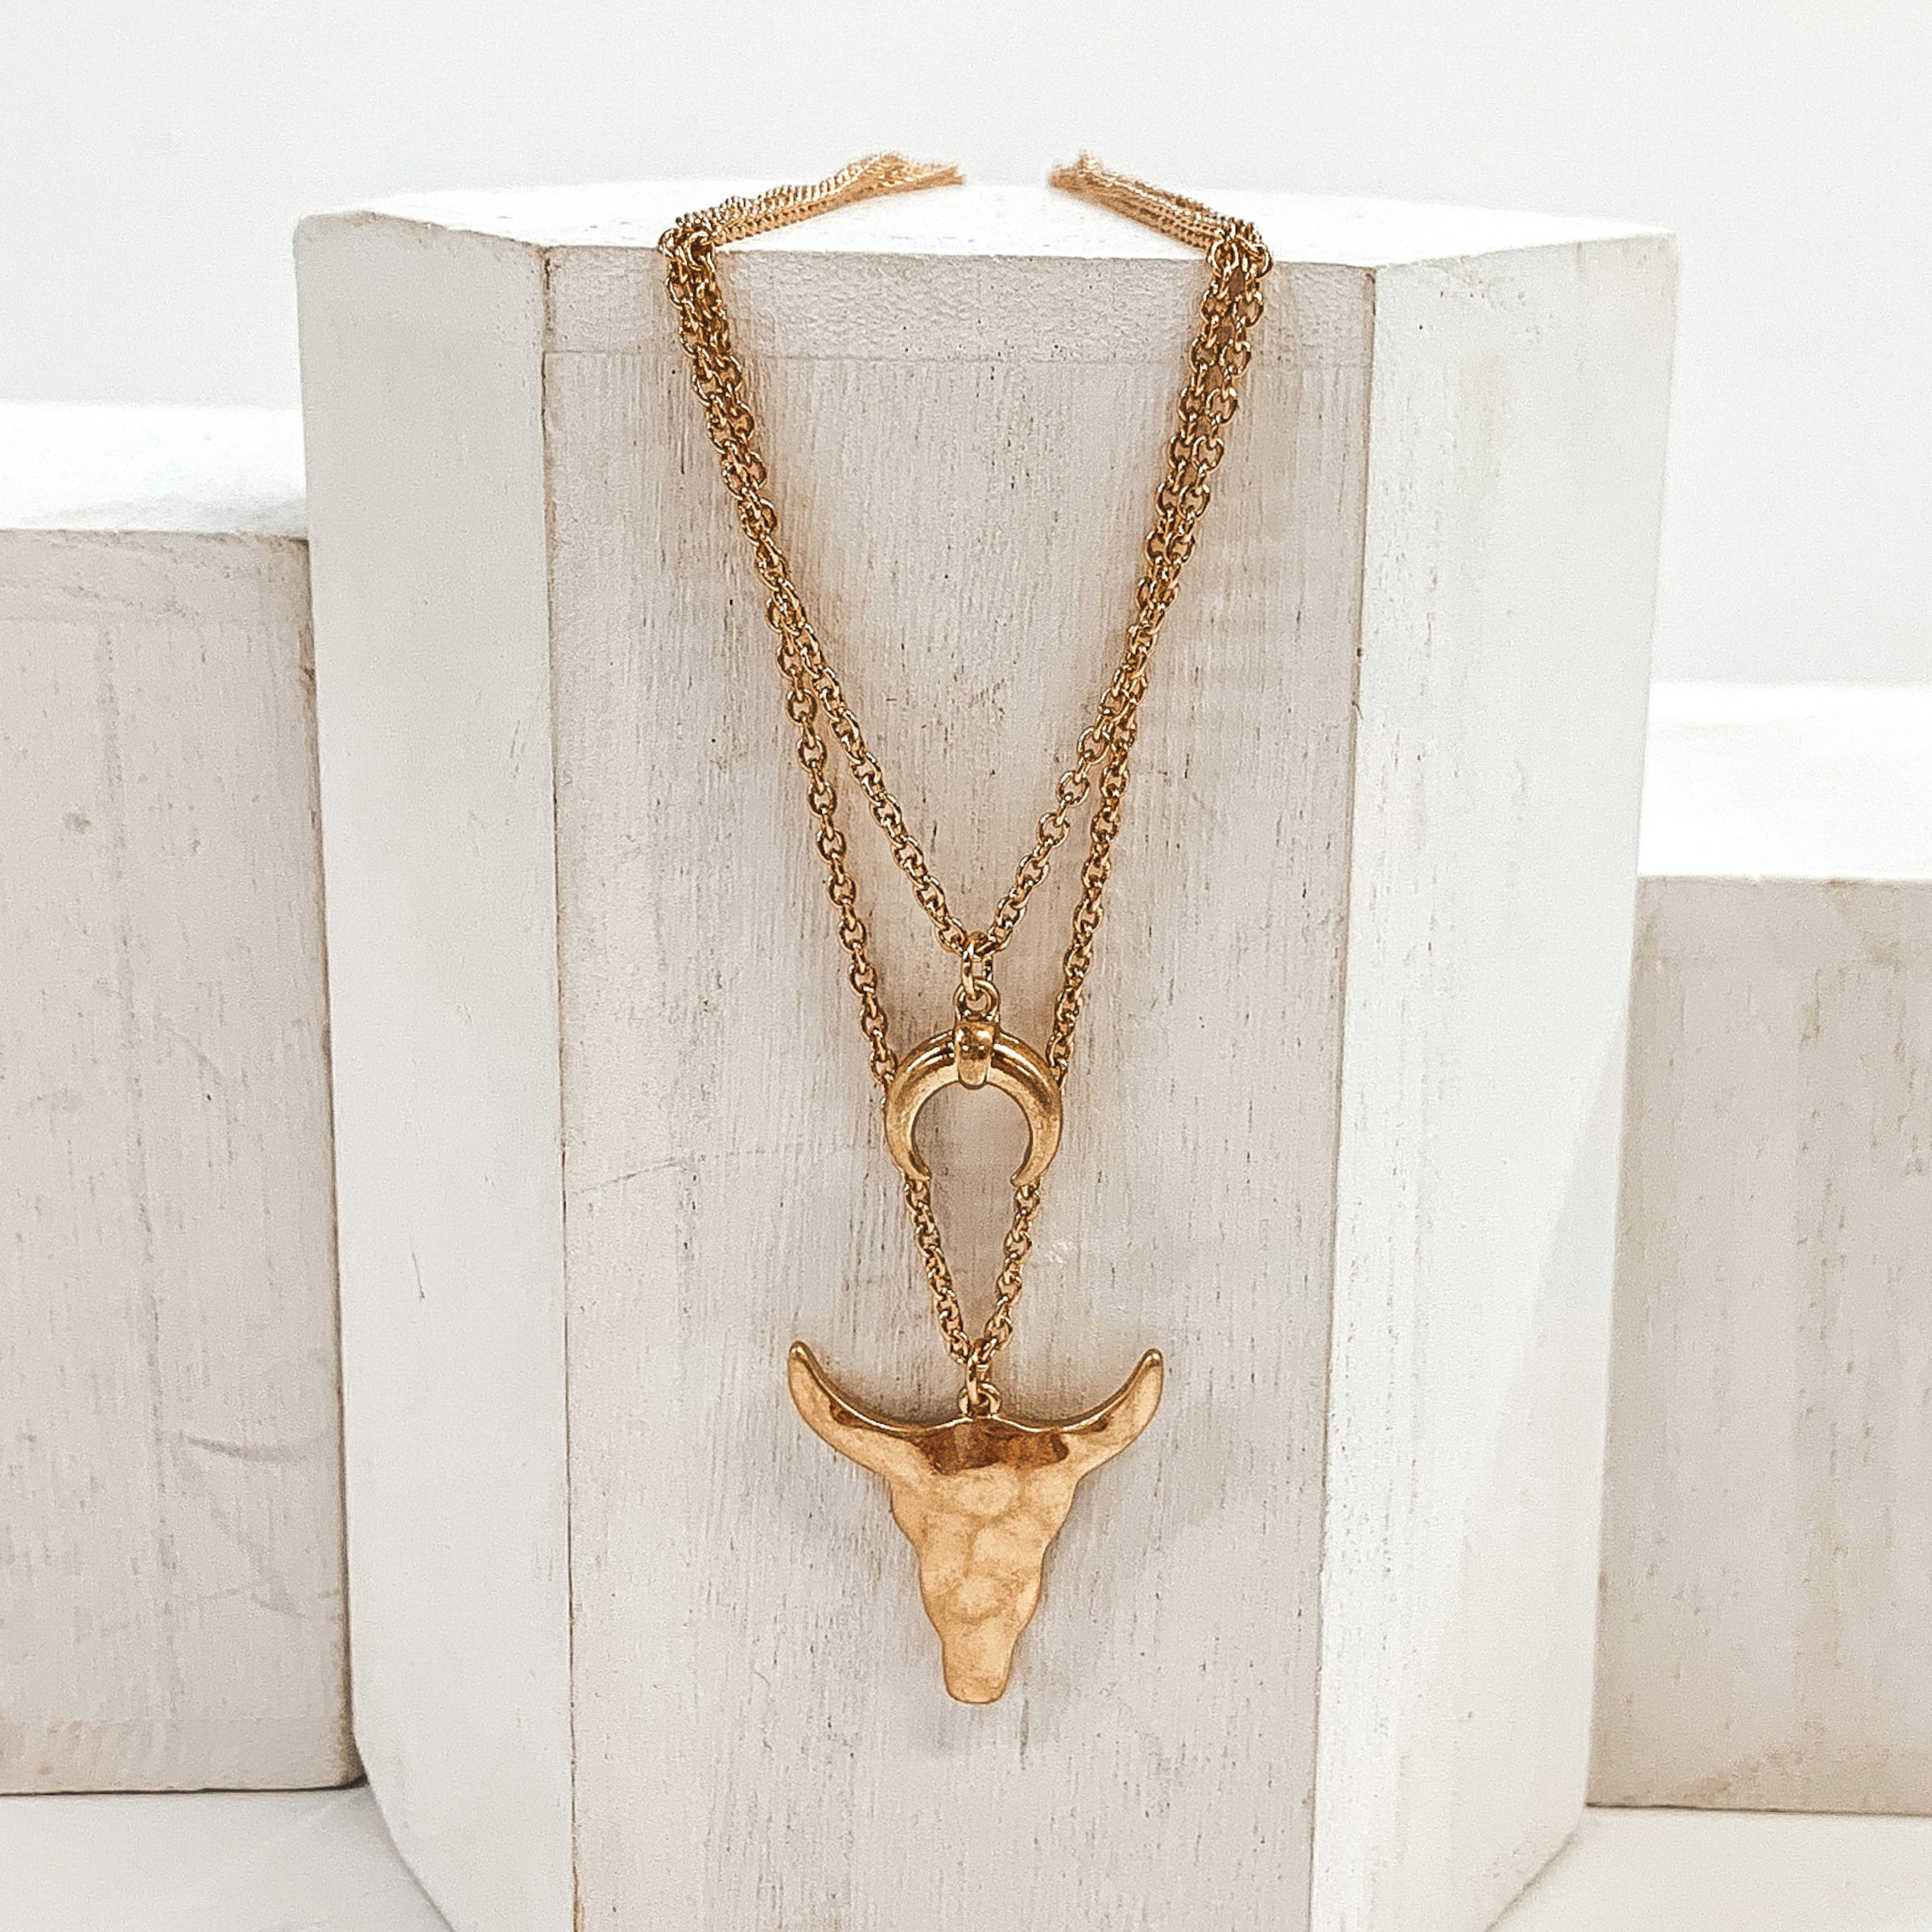 Gold double layered chained necklace with a bull skull pendant on the longer strand and horn pendant. This necklace is pictured laying on a white block on a white background.